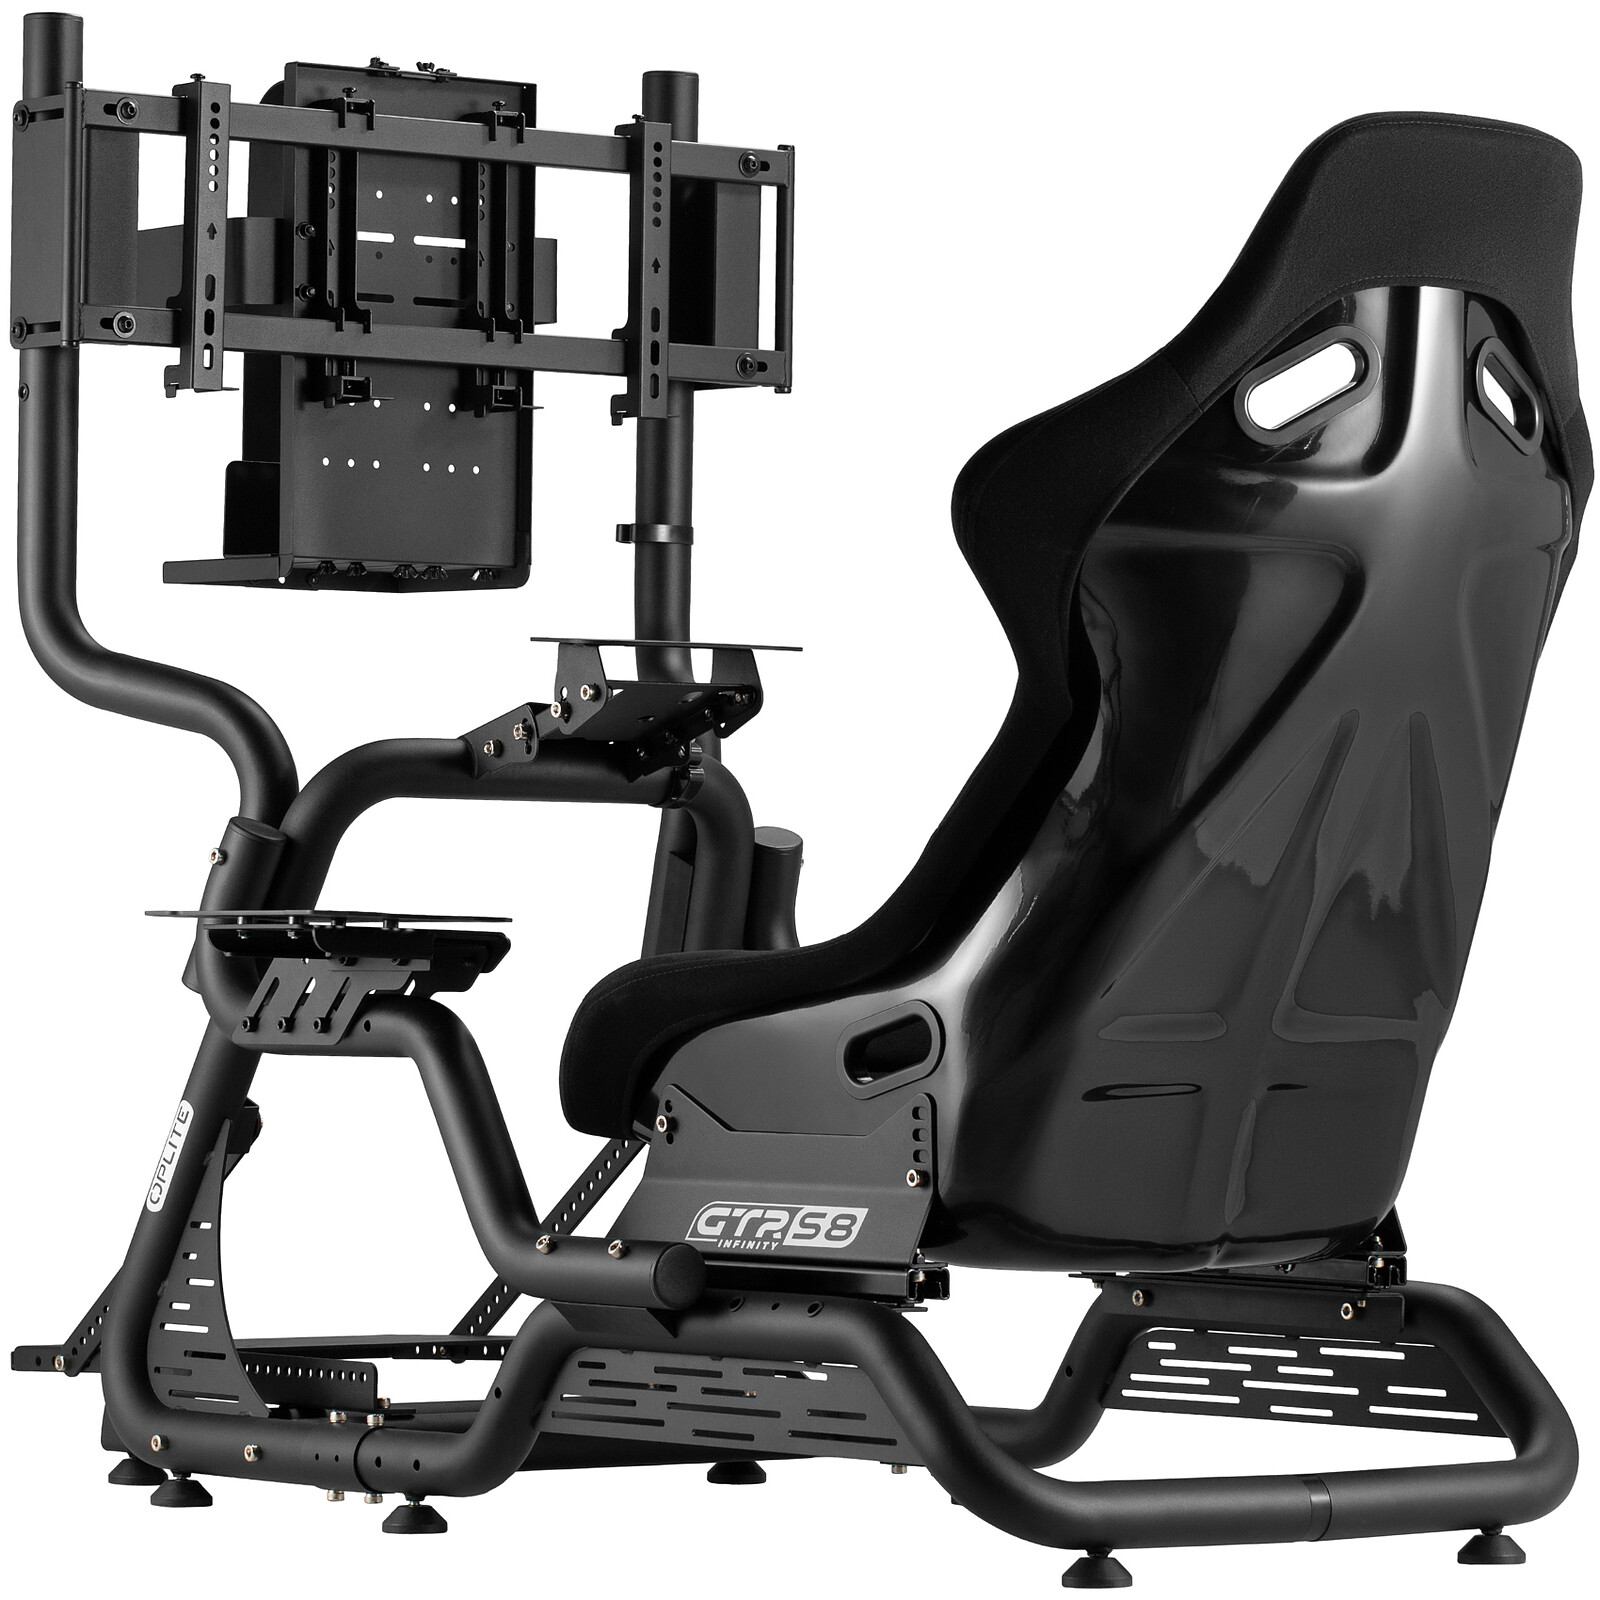 OPLITE Cockpit GTR S8 Infinity Force - Other gaming accessories - LDLC  3-year warranty